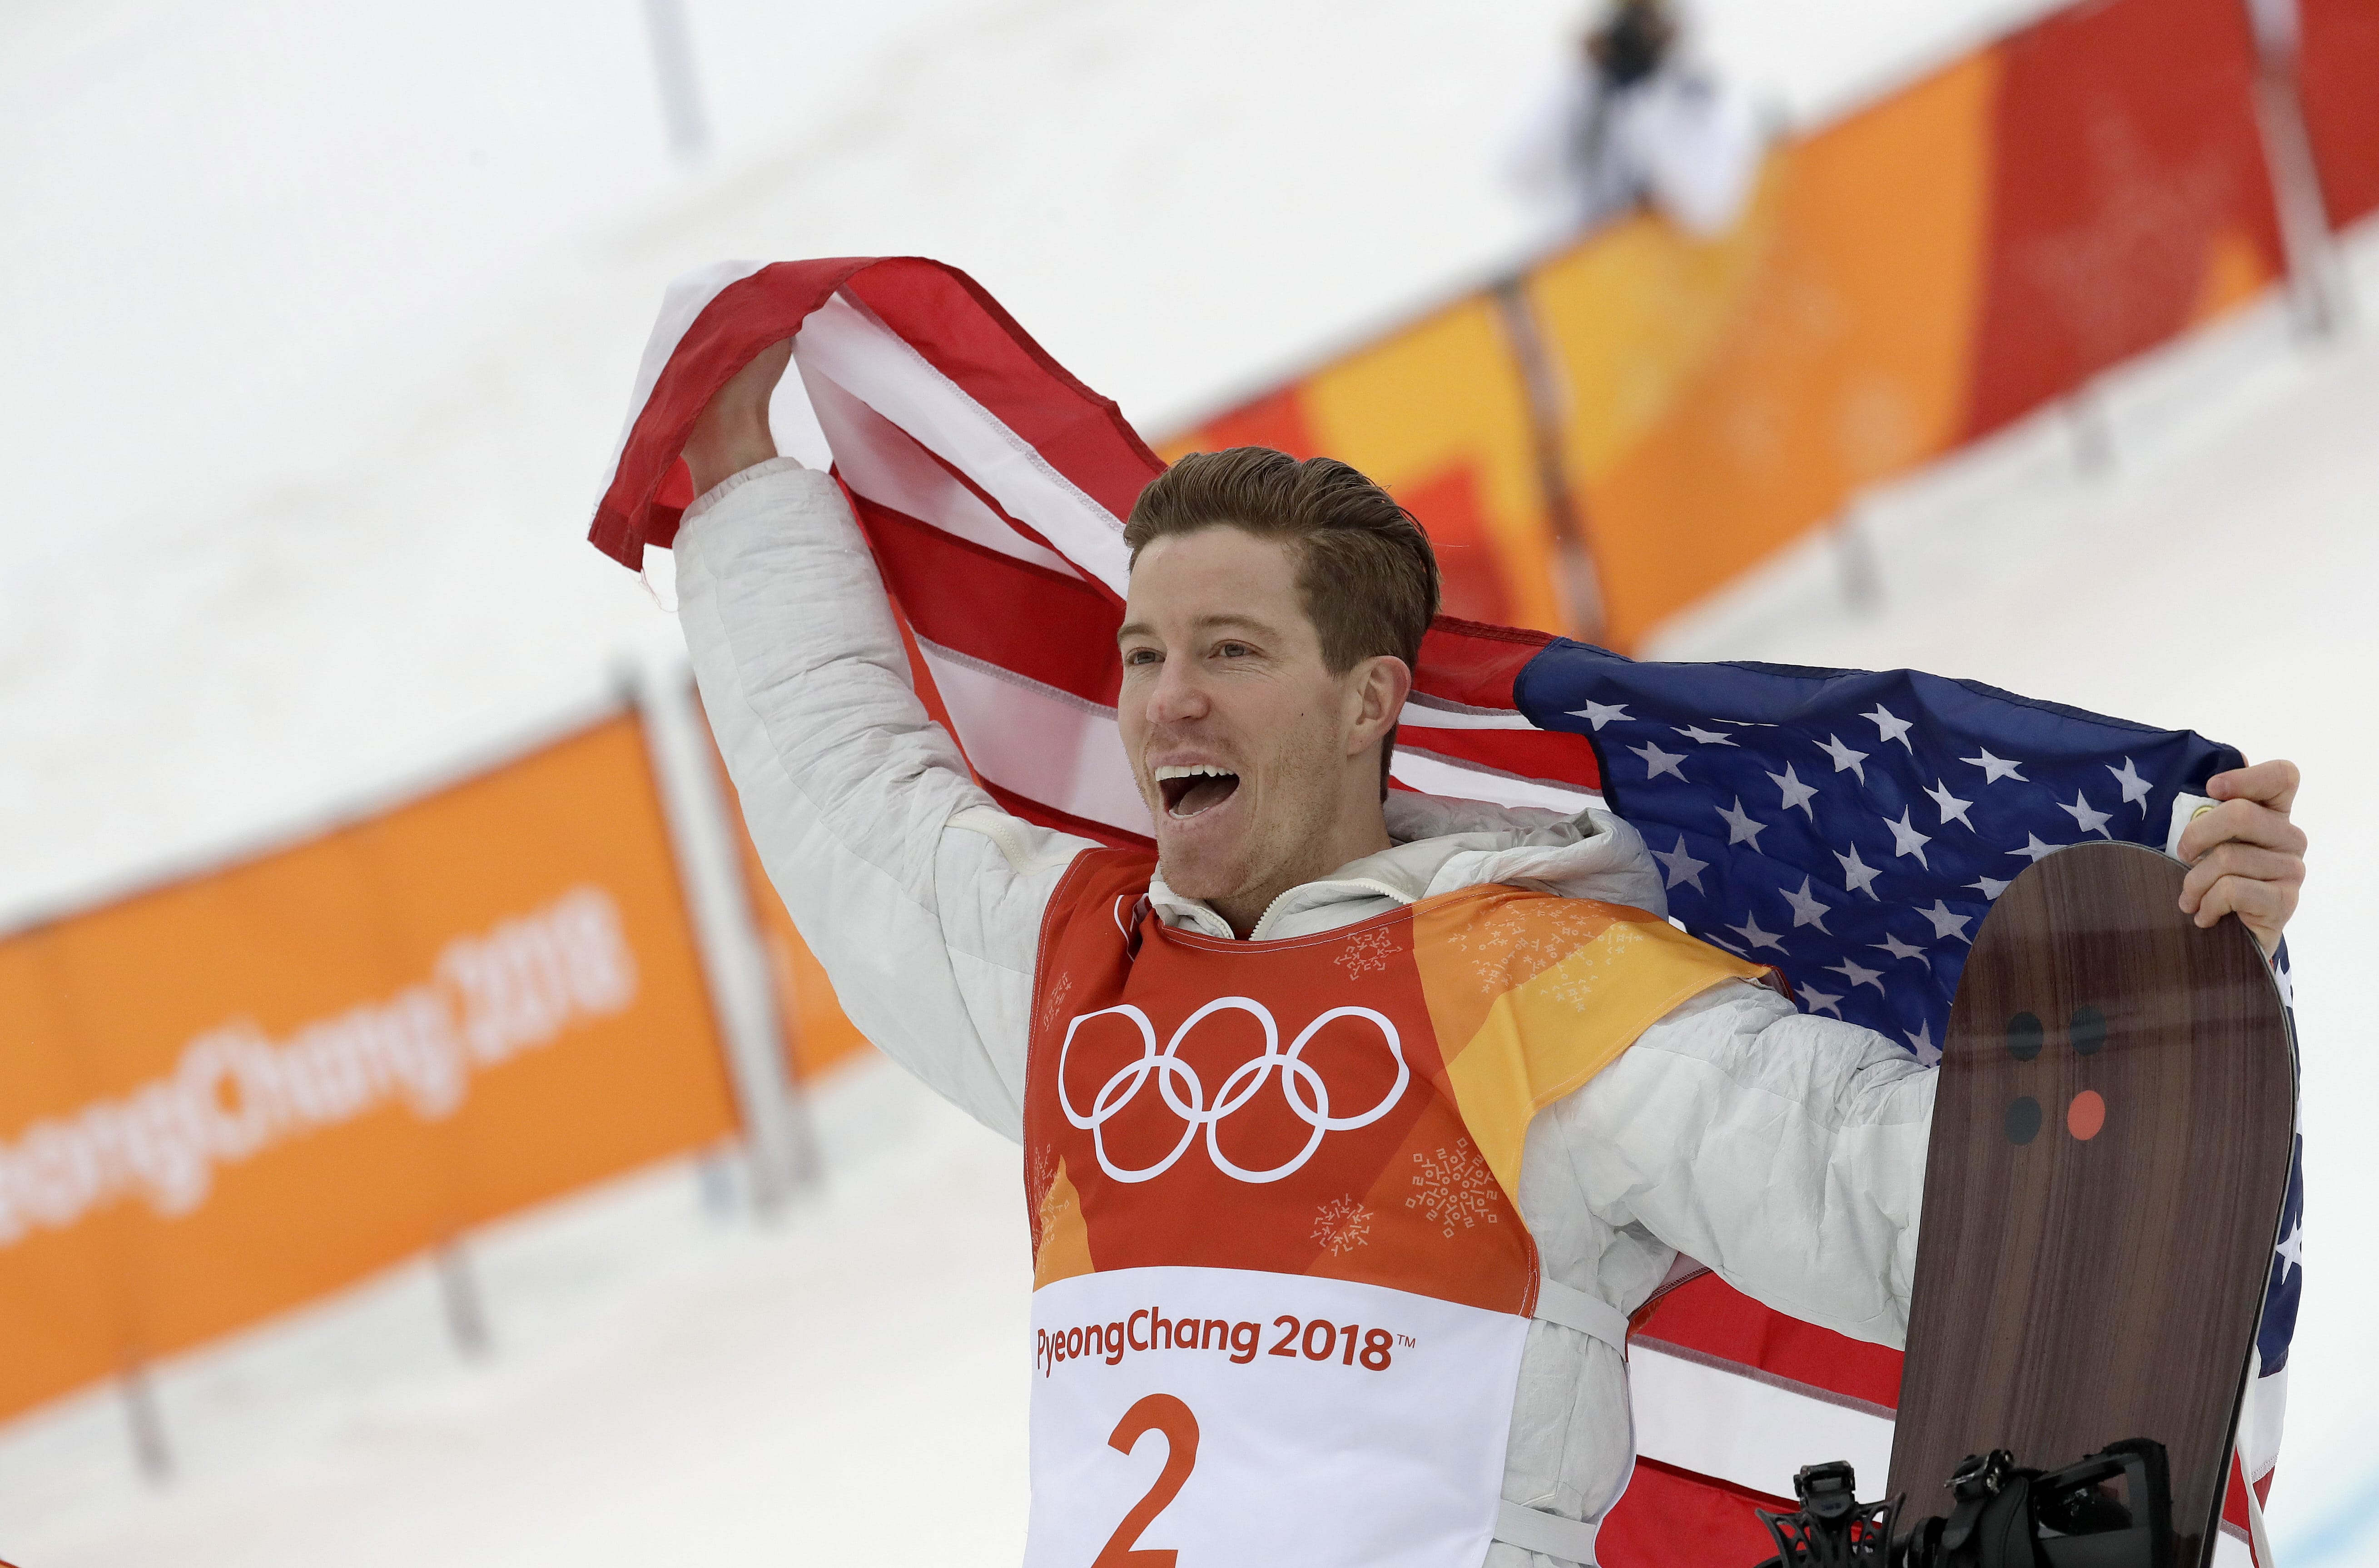 Shaun White schedule: Start time for his run in Olympic